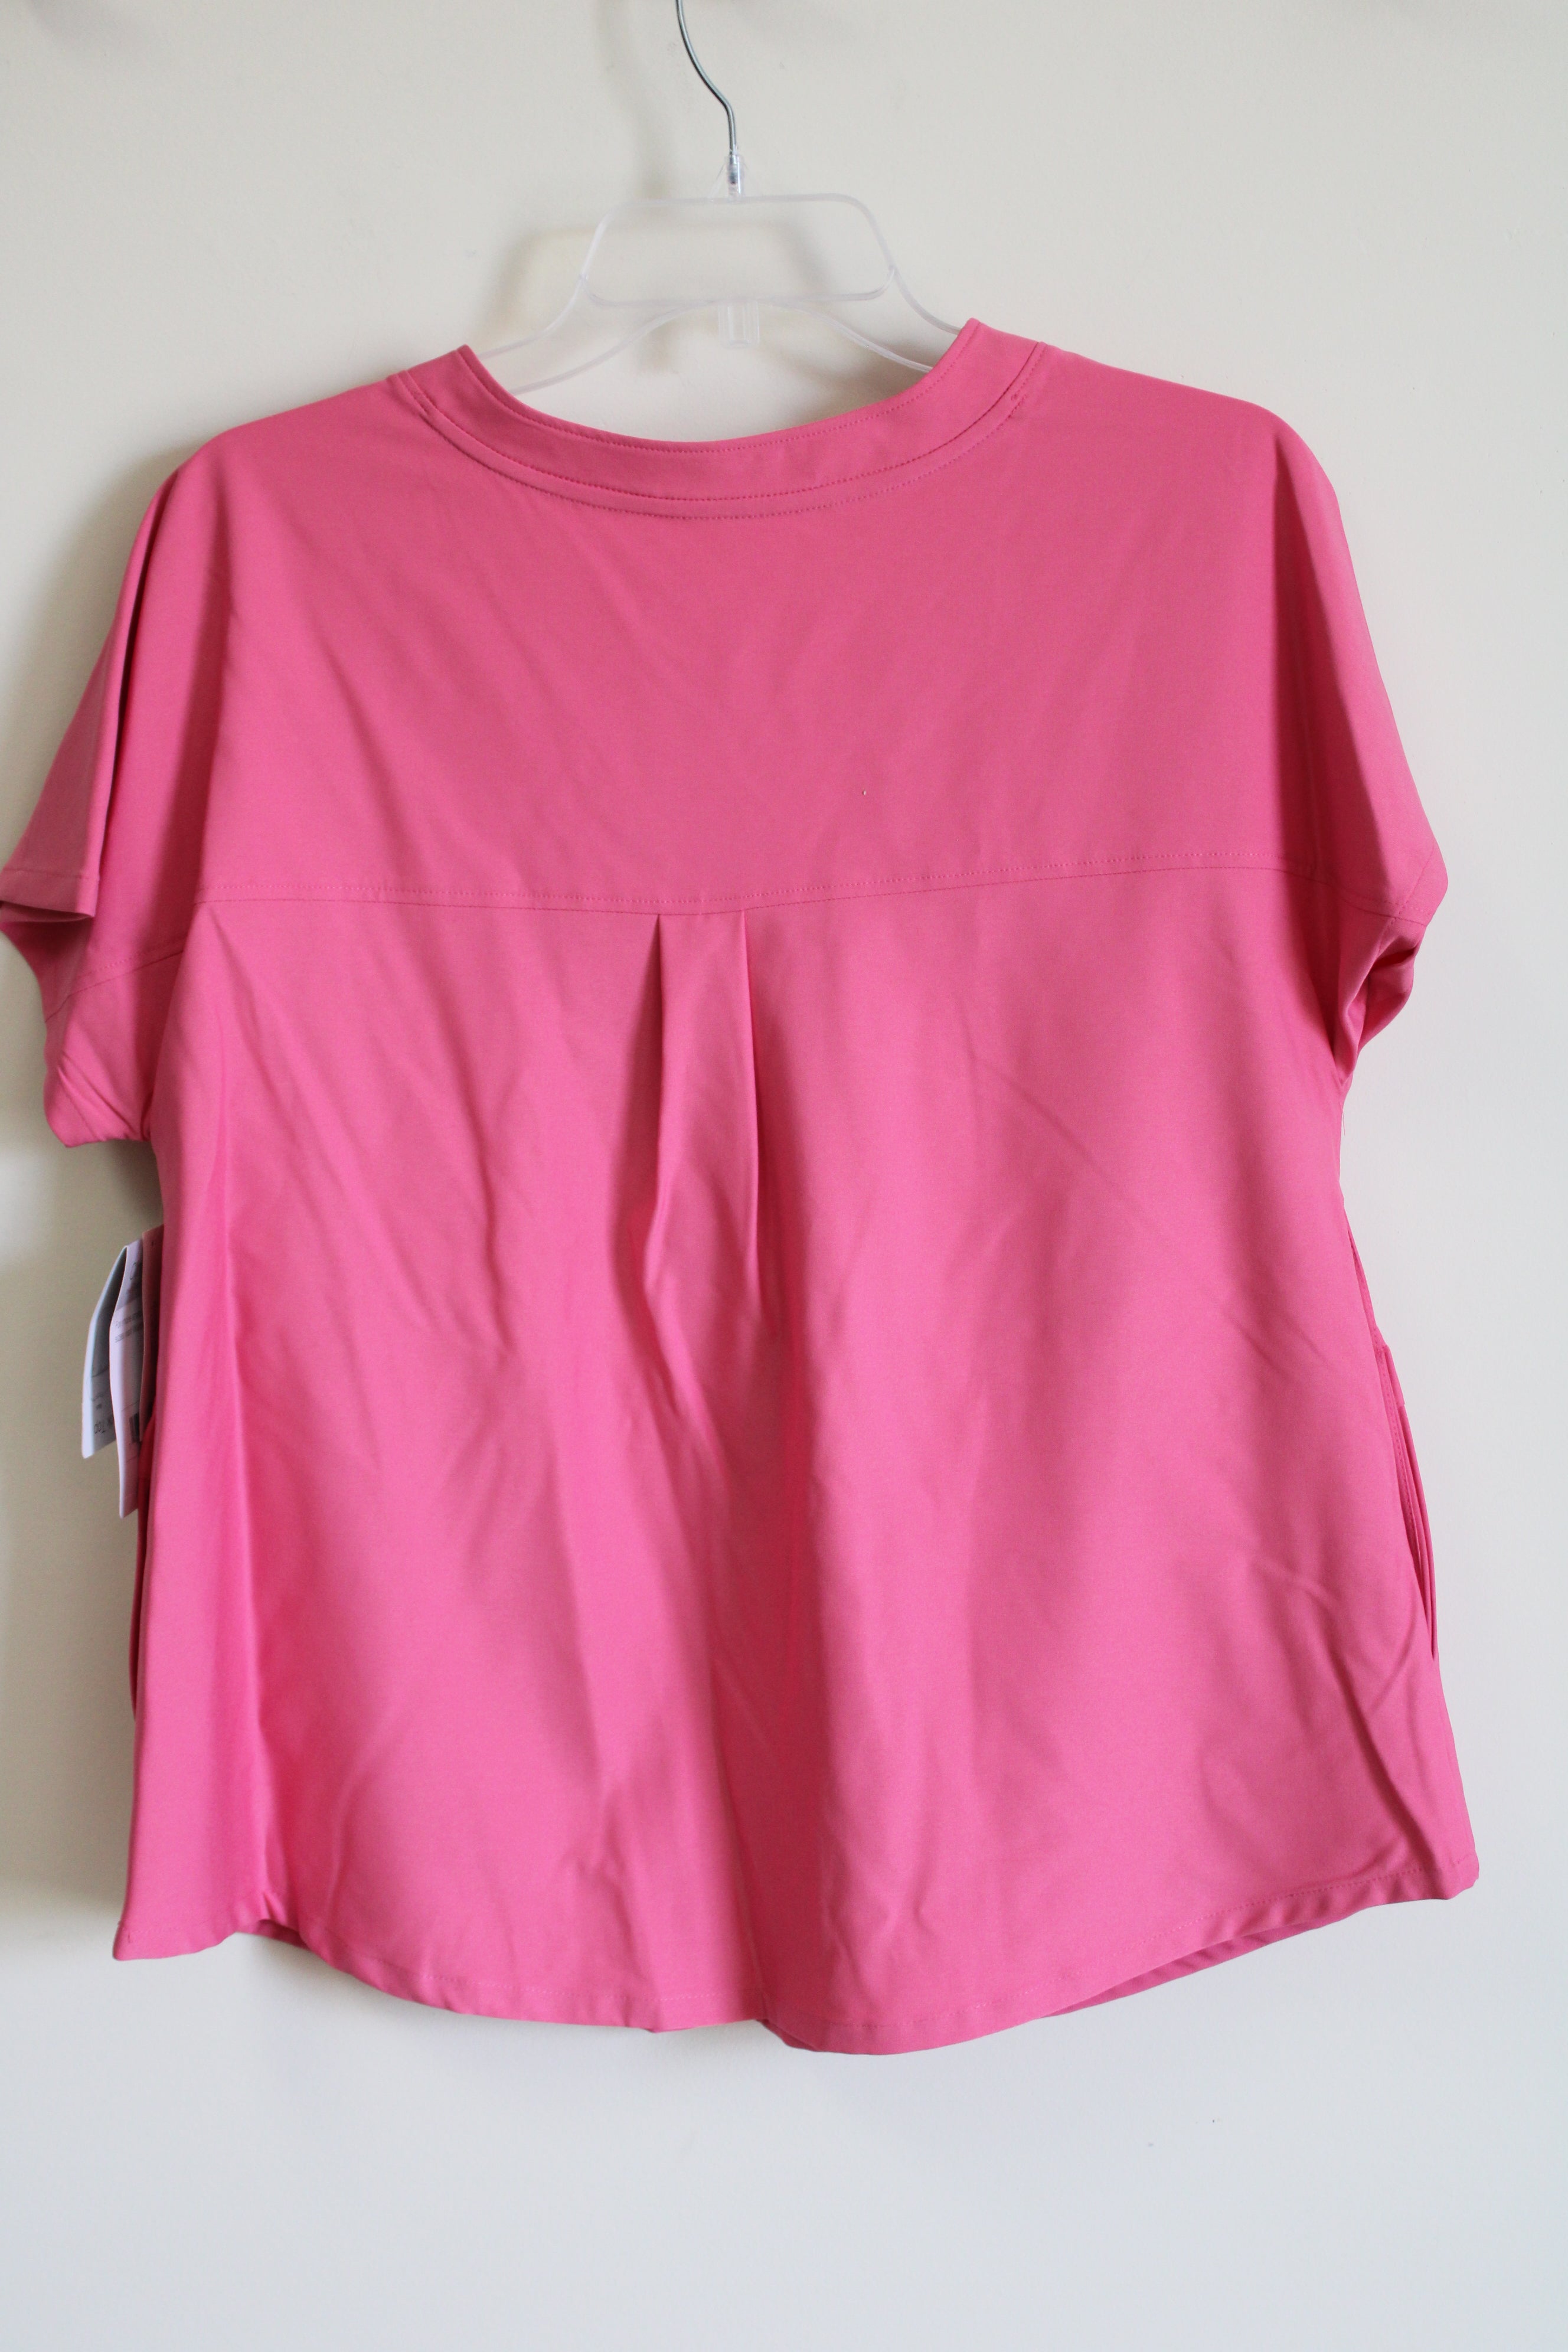 ClimateRight by Cuddl Duds Women's Scrub Top PINK SZ XL New w/Tags